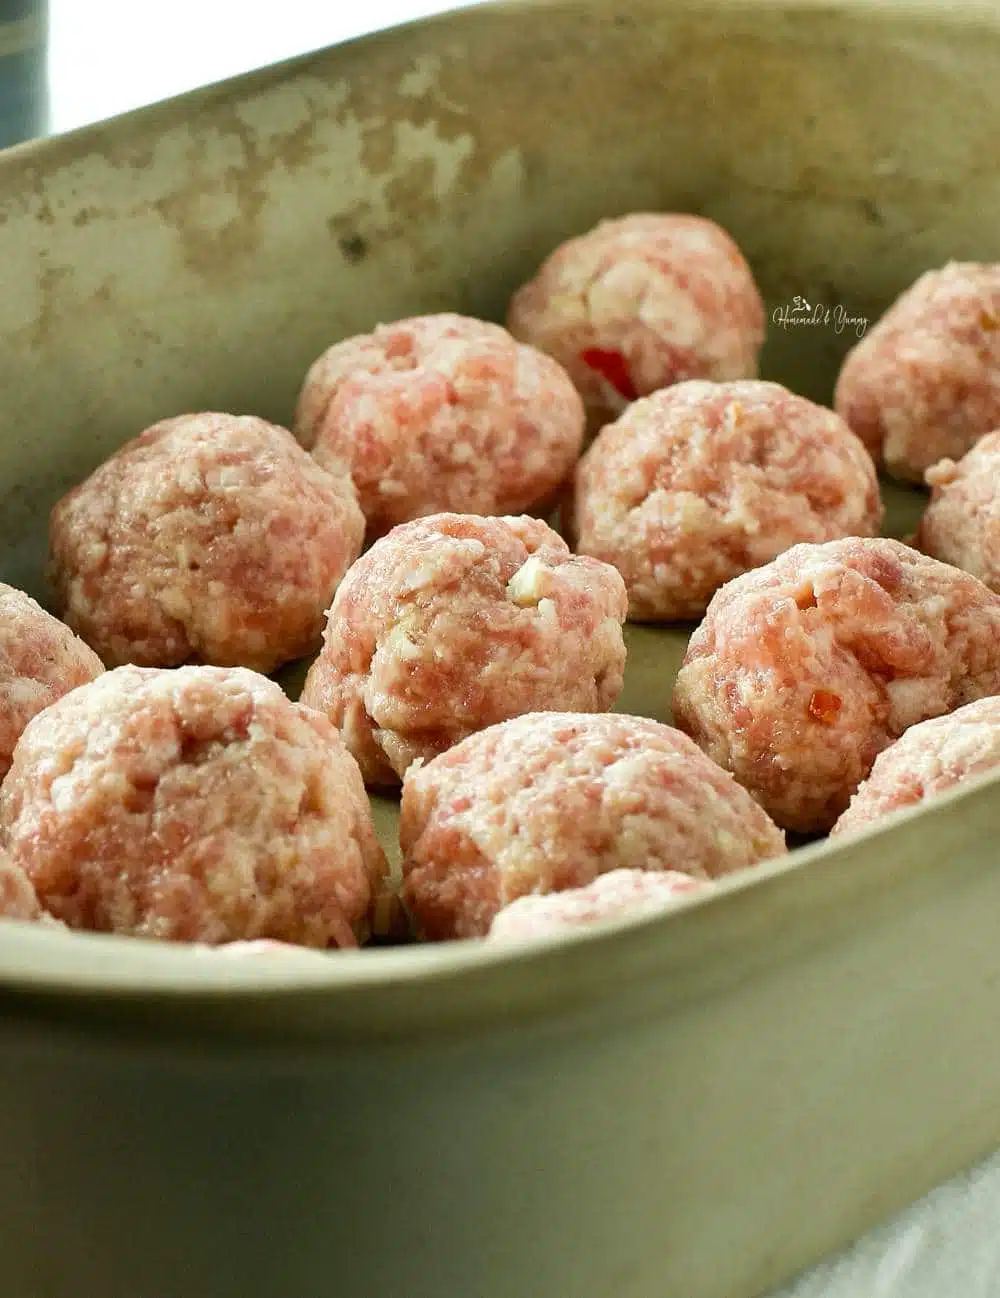 Pork meatballs in a baking dish ready to go into the oven.